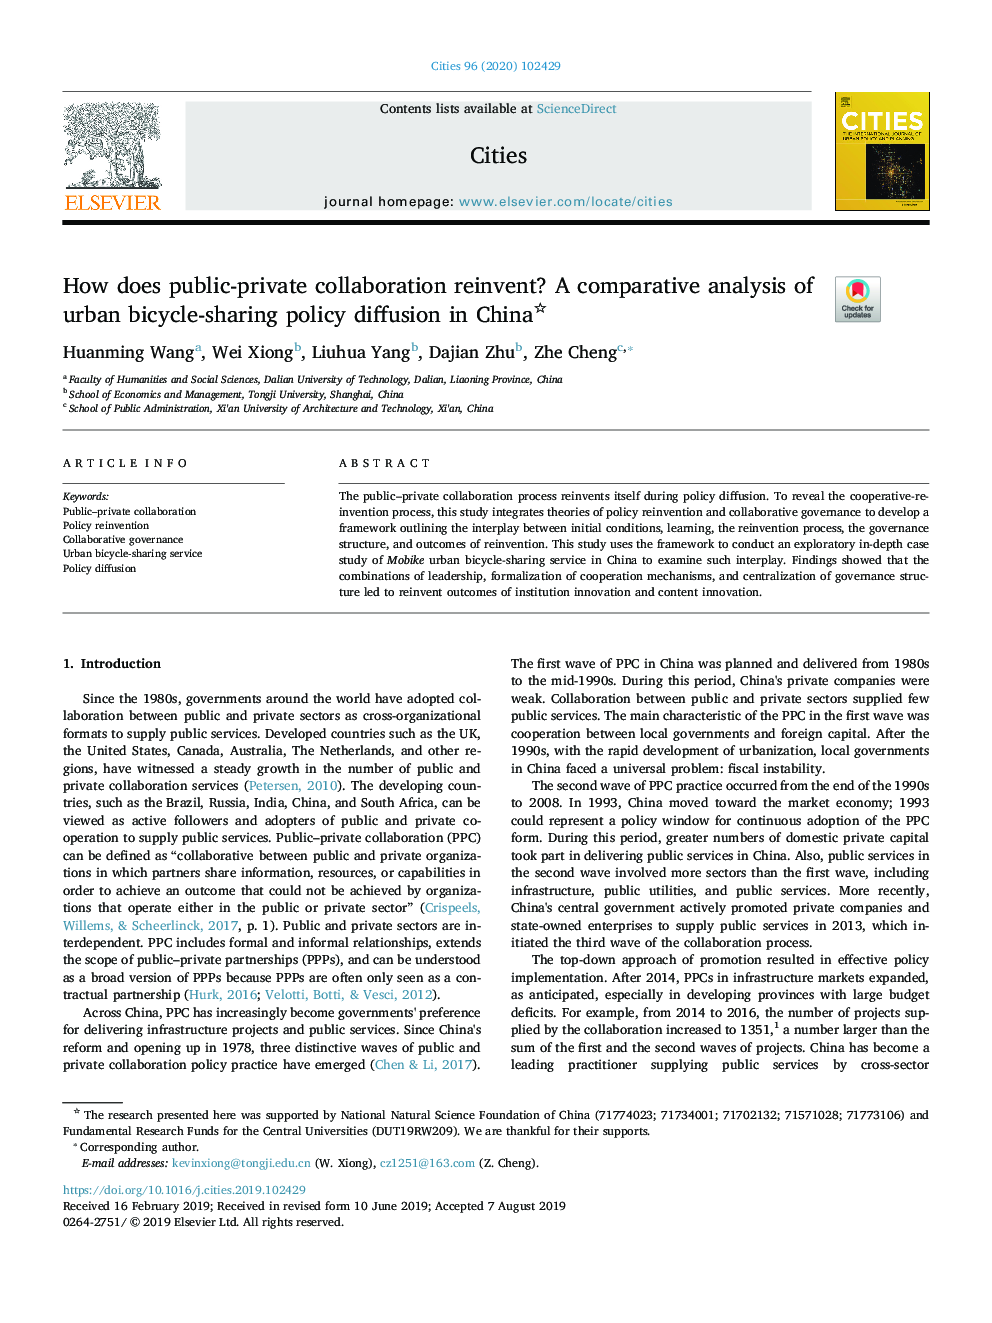 How does public-private collaboration reinvent? A comparative analysis of urban bicycle-sharing policy diffusion in China